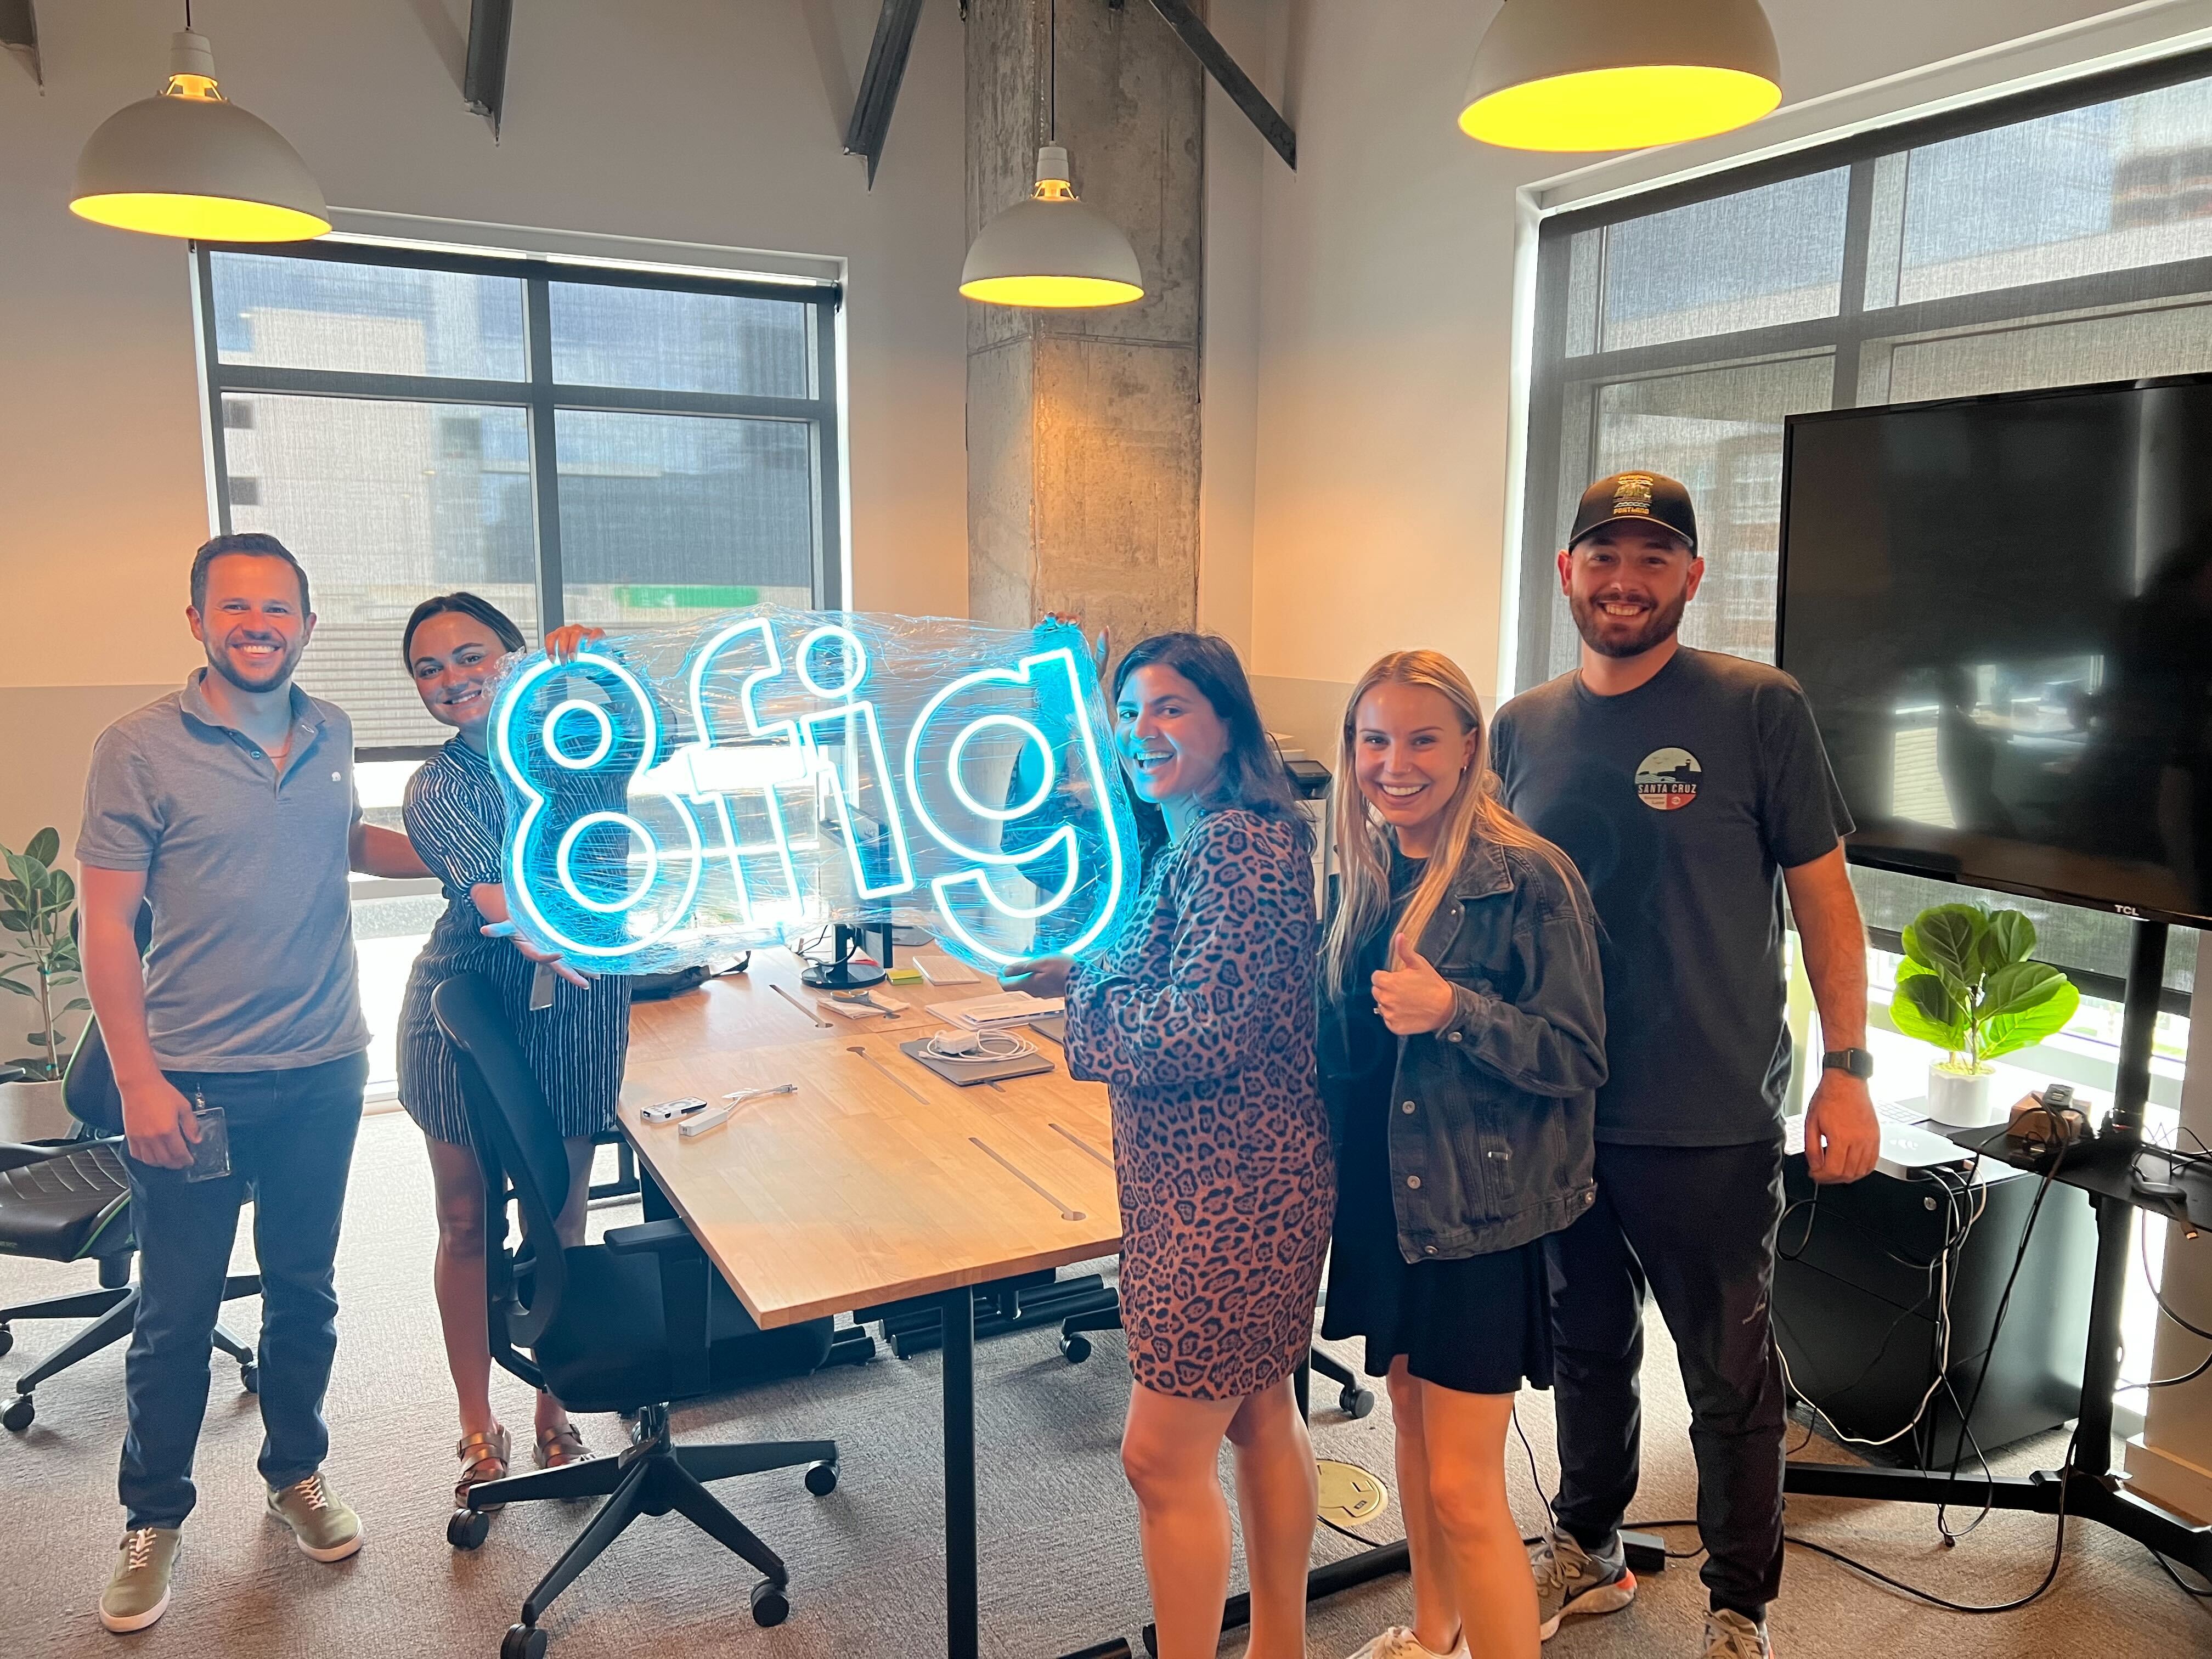 Small team inside of an office meeting room holding a large, lighted 8fig logo.